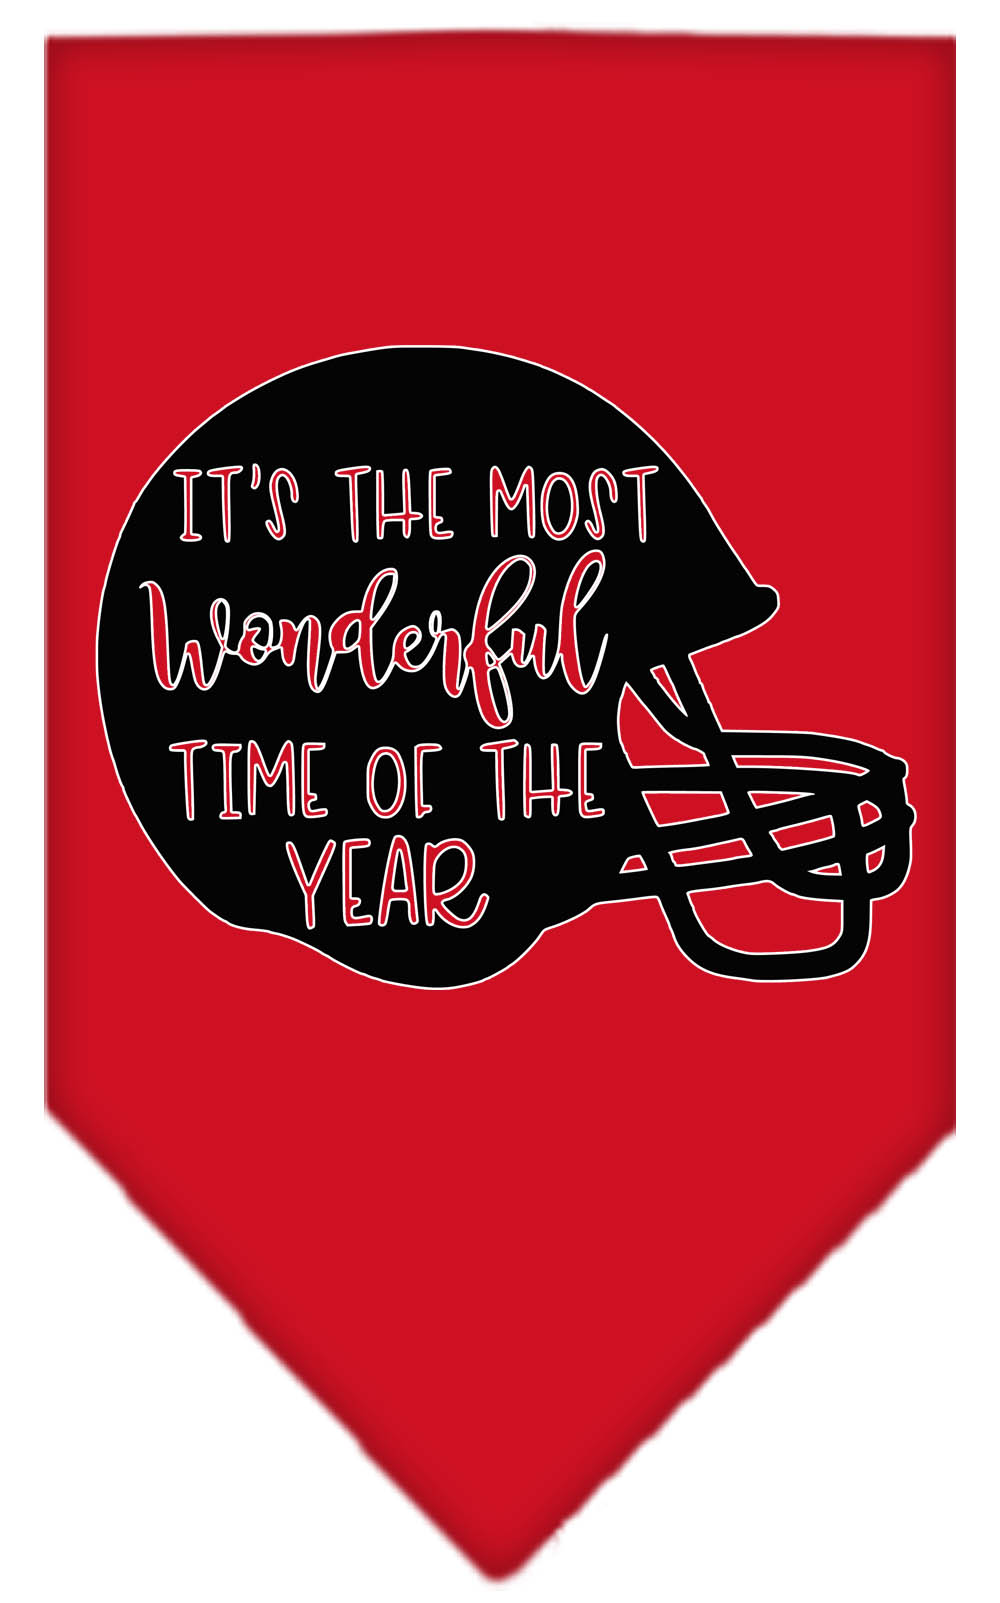 Most Wonderful Time of the Year (Football) Screen Print Bandana Red Large